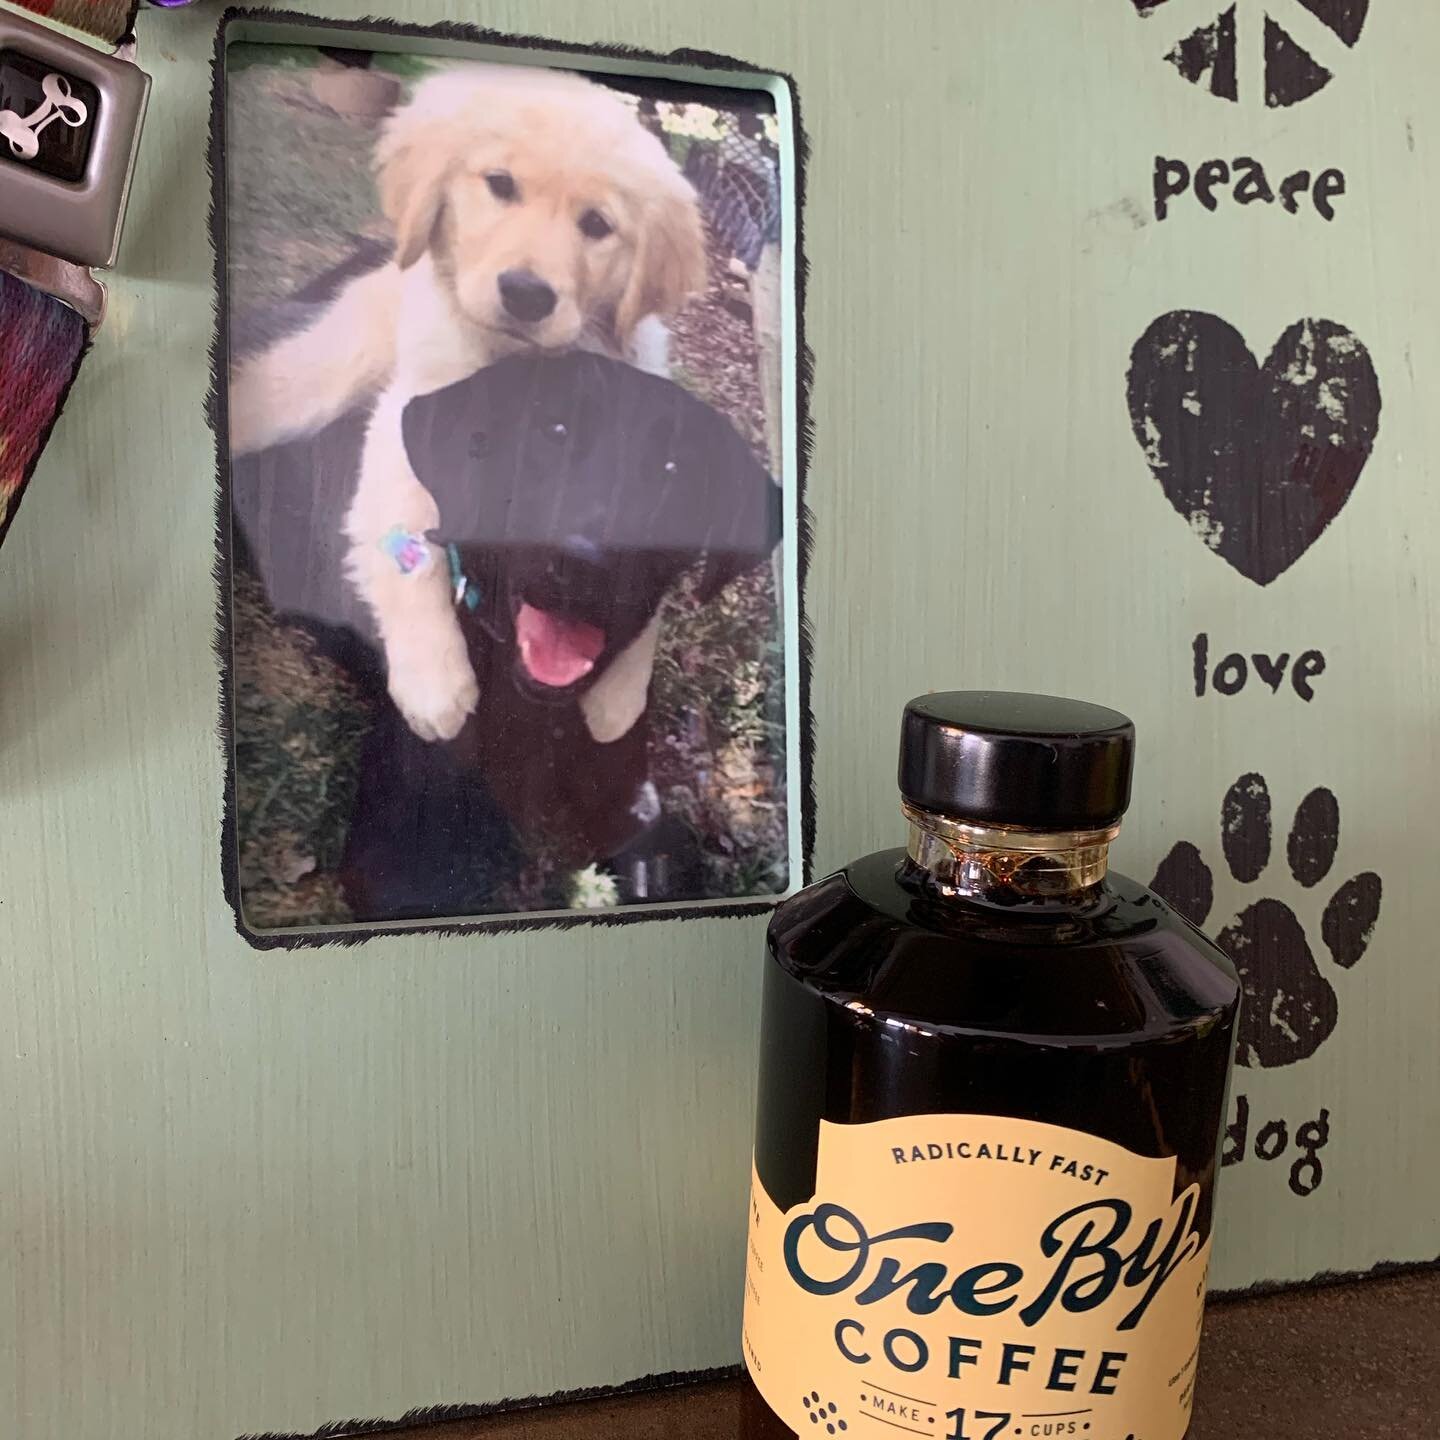 We are loving this new coffee, fast, easy and delicious!  Thanks @onebycoffee !  #onebycoffee #peacelovepetcare #afternoondelight